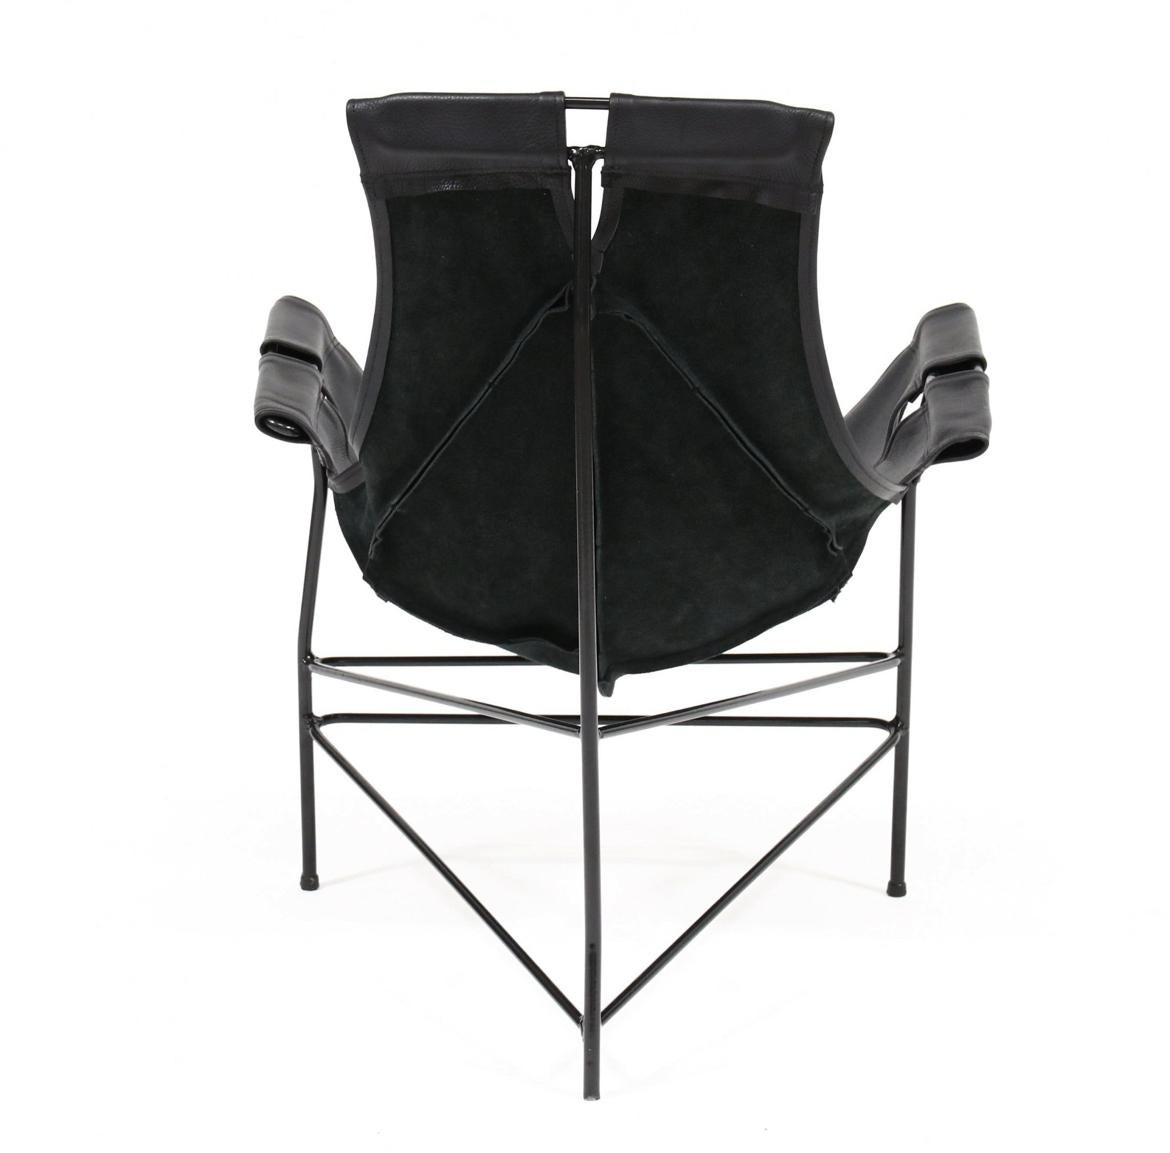 Américain The Modernity modern black leather iron sling lounge chair by Leathercraft en vente